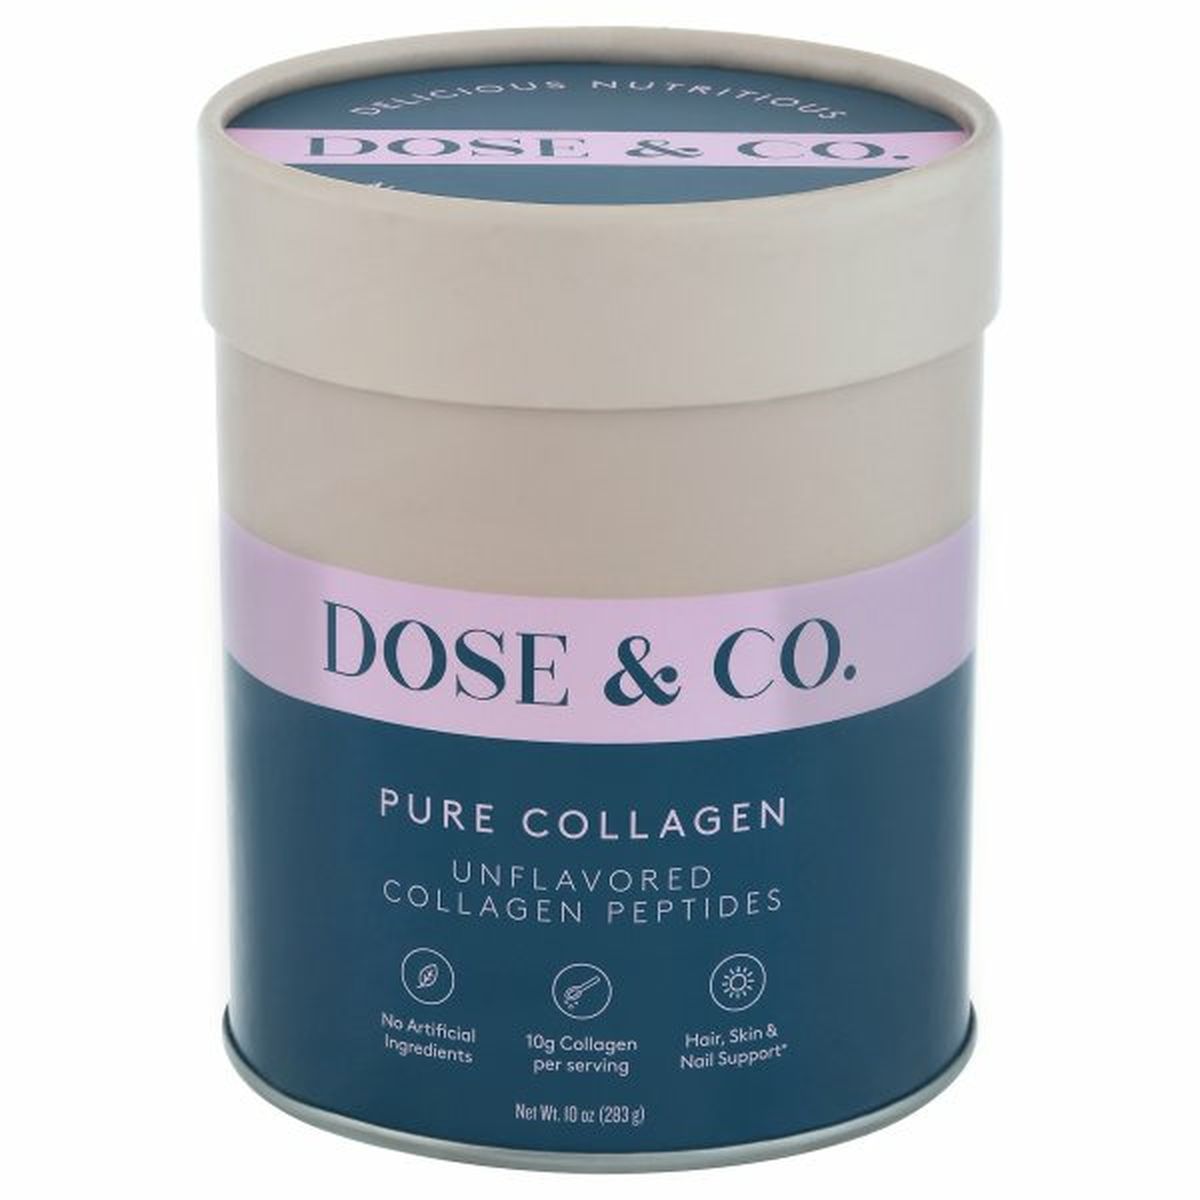 Calories in Dose & Co. Pure Collagen, Unflavored